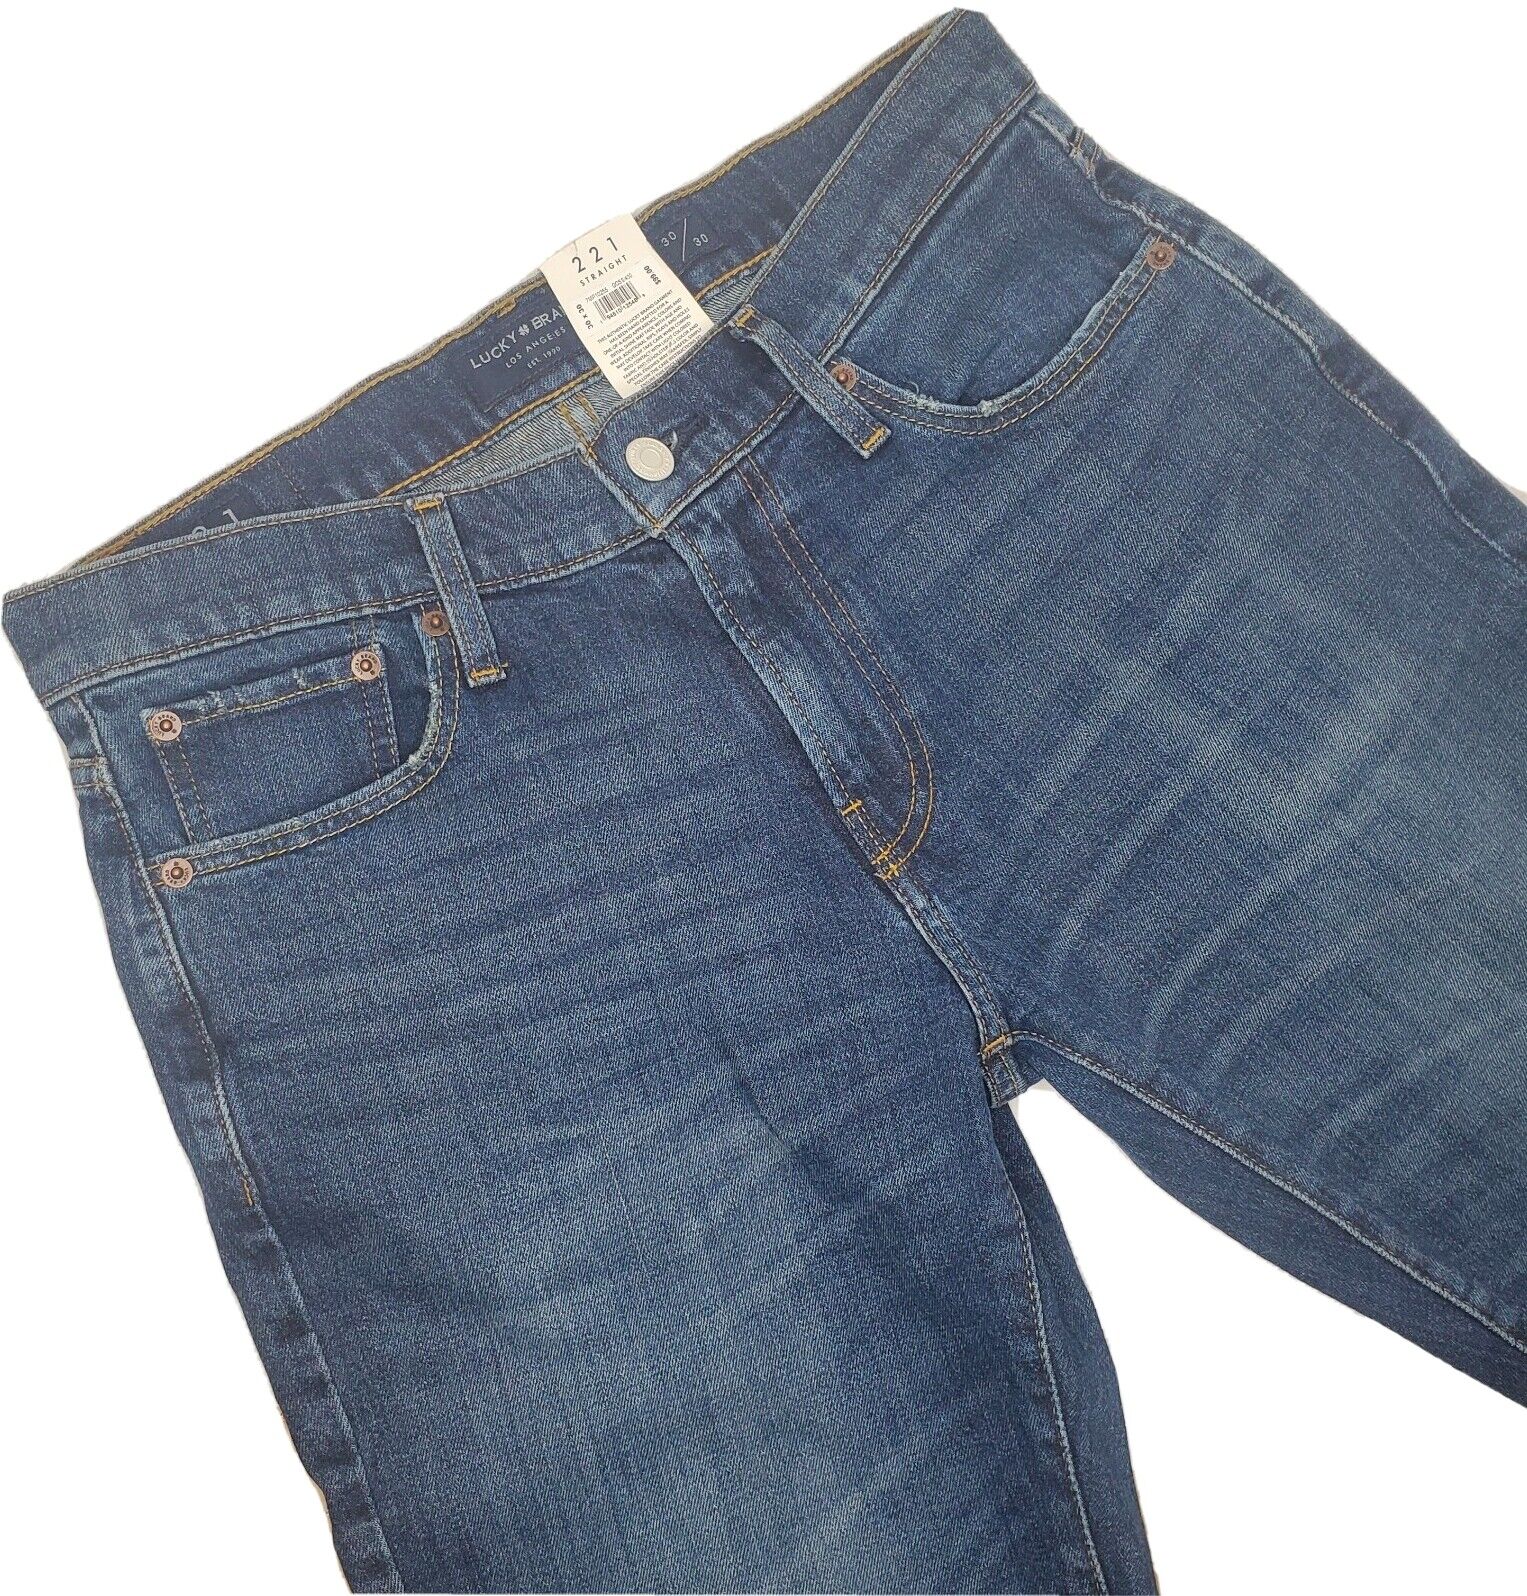 Lucky Brand Jeans Mens Size 30x30 A surprise price is realized nWt 221 MSRP Cheap super special price 99$ Straight